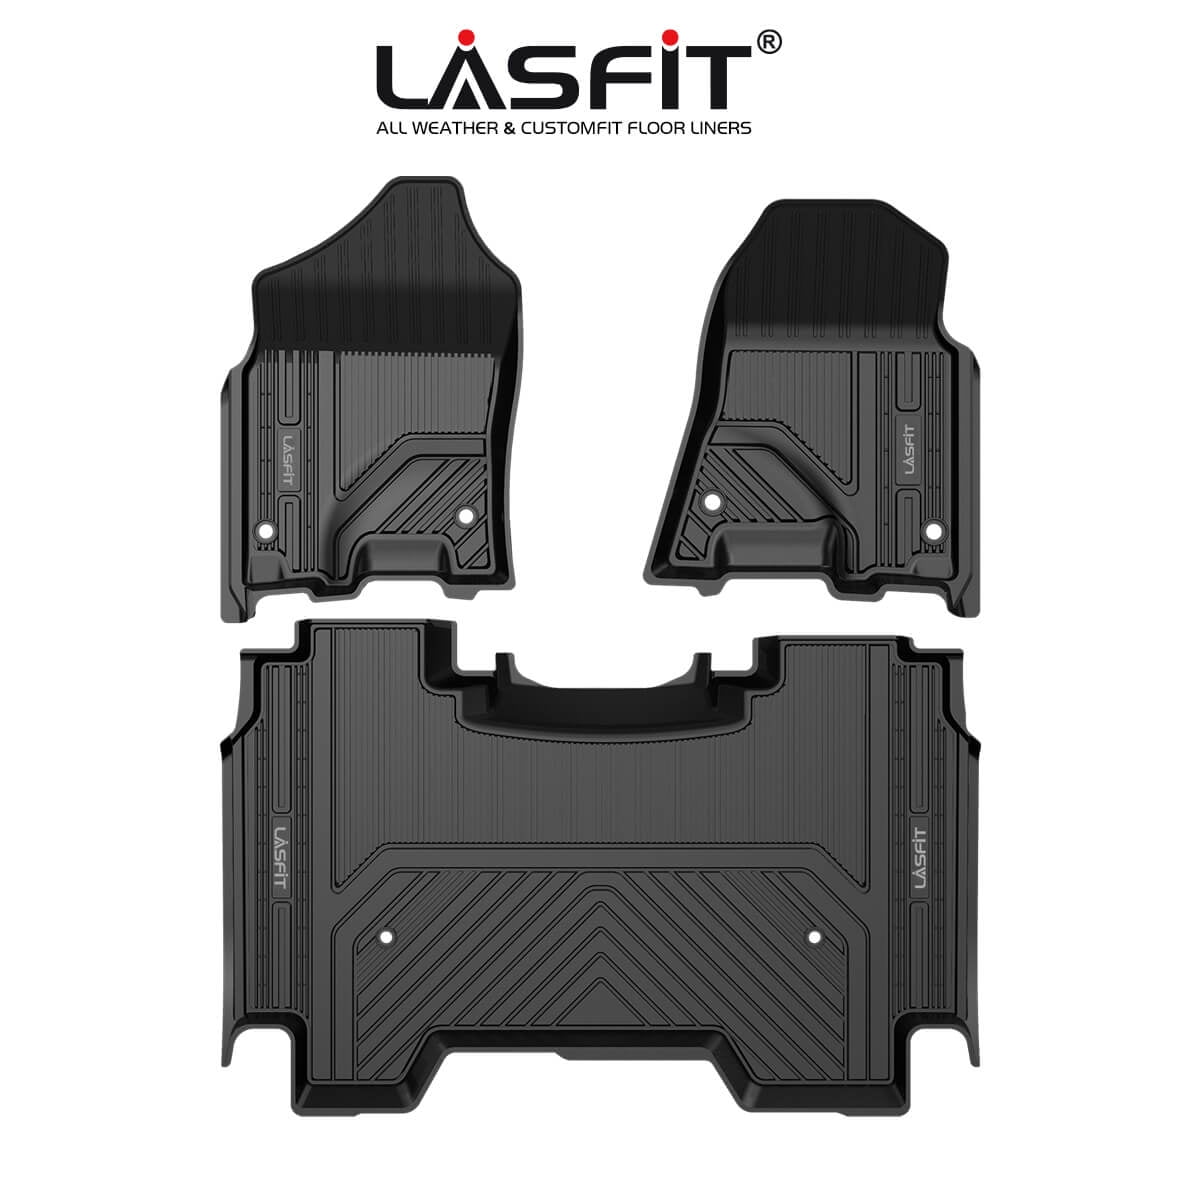 LASFIT Floor Liners for 2019-2020 Ram 1500 Crew Cab(Not for Storage Under Rear Seat), All 2020 Ram 1500 Crew Cab Floor Mats